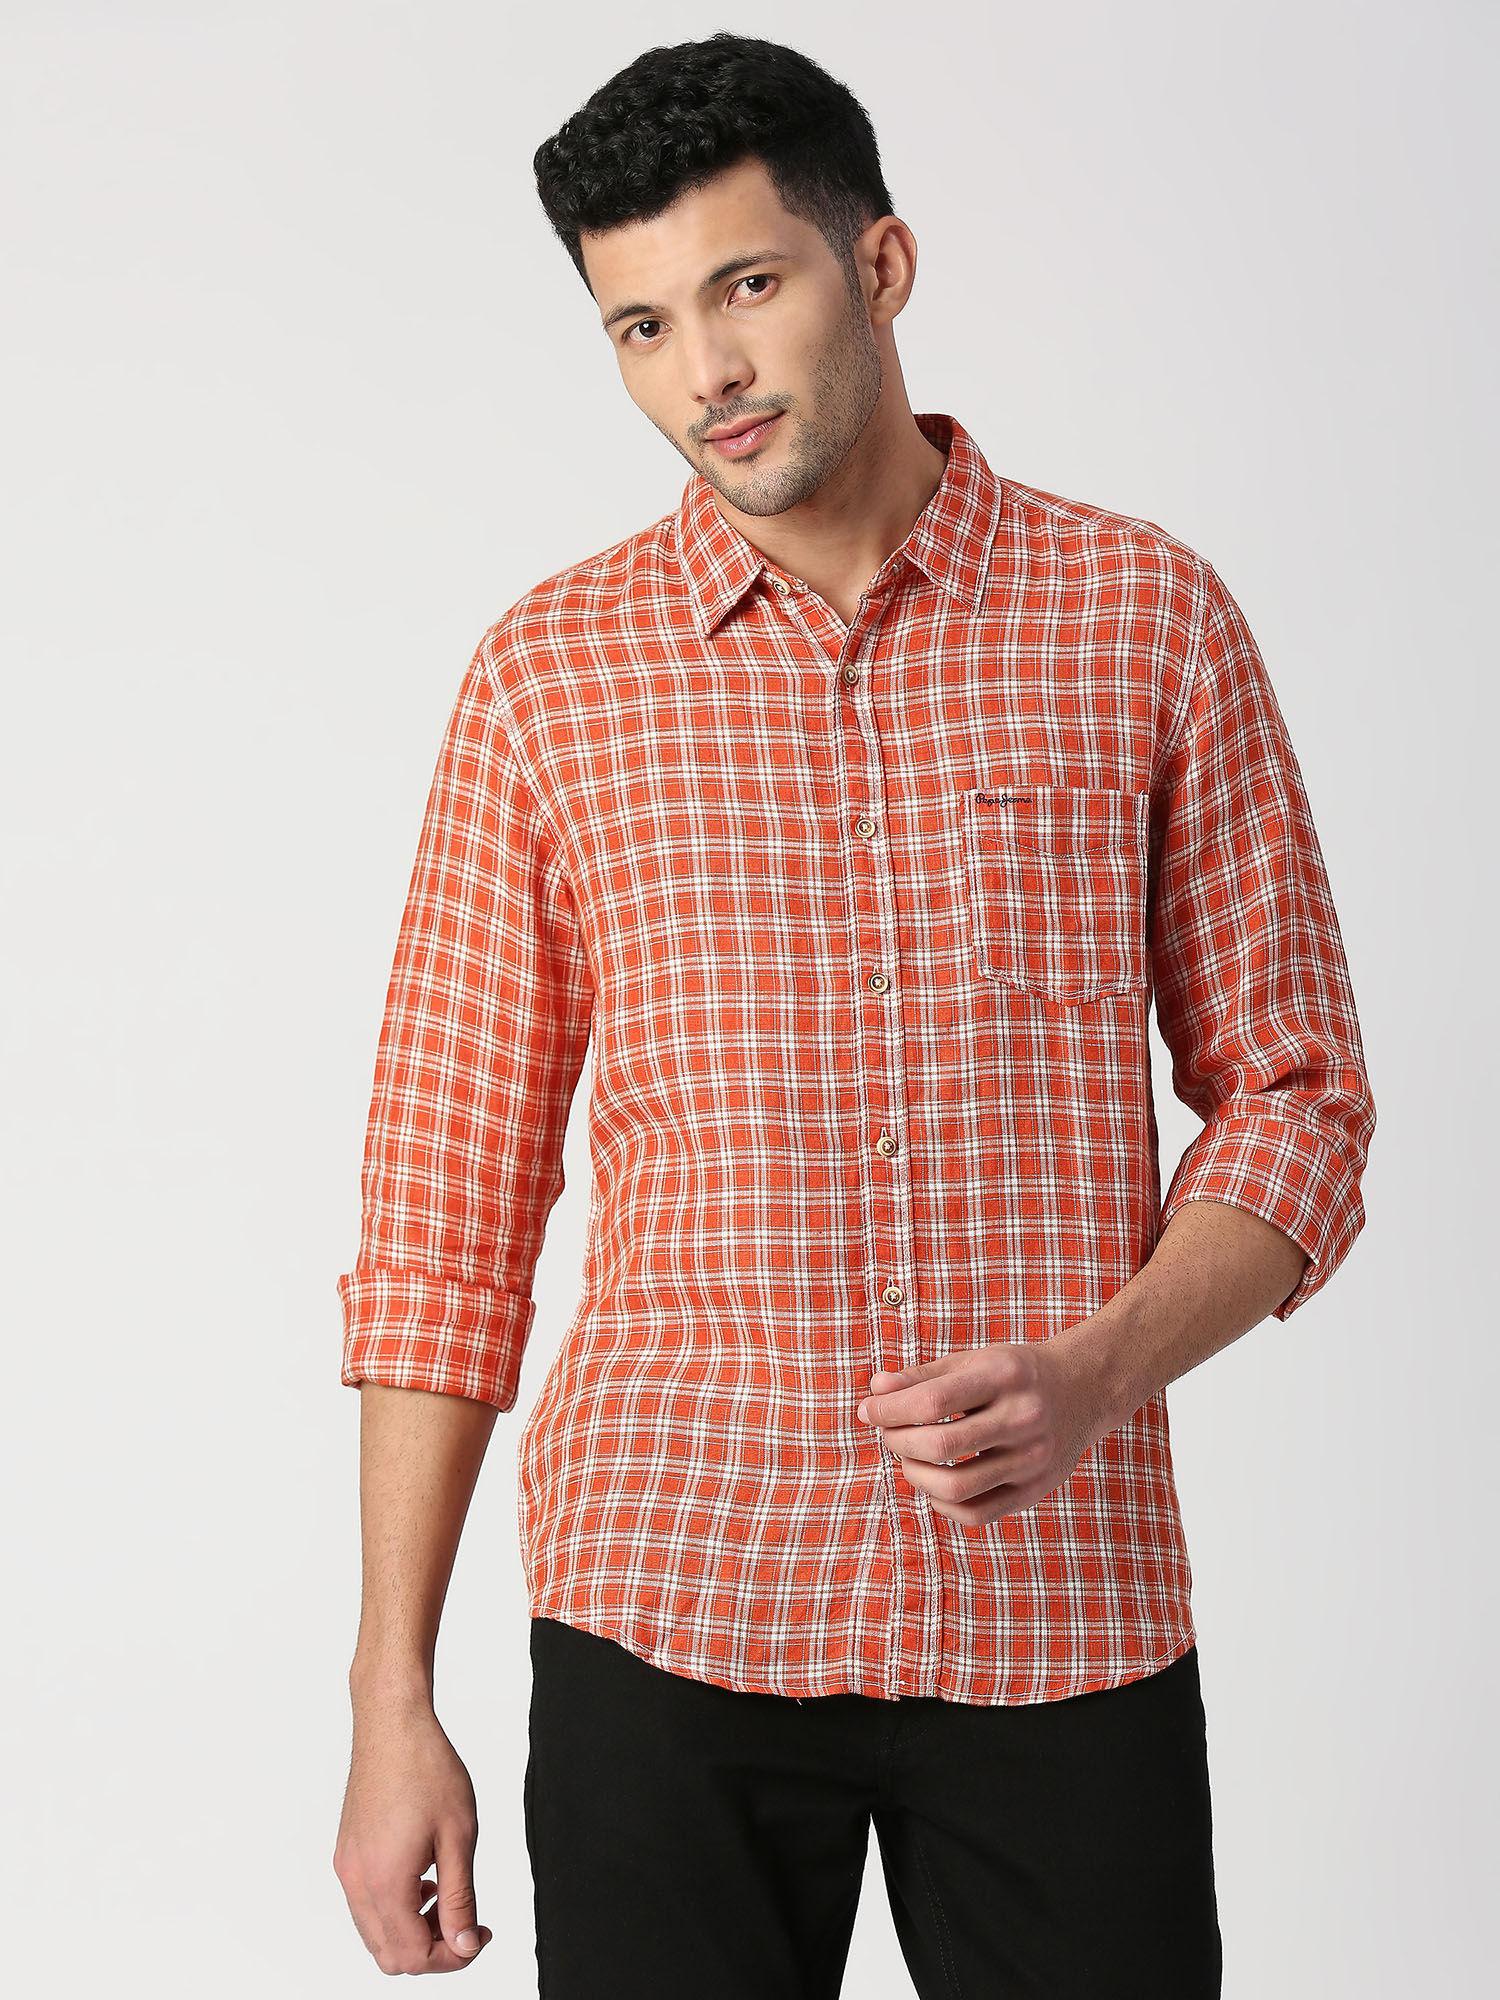 drown-full-sleeves-pure-linen-check-casual-shirt